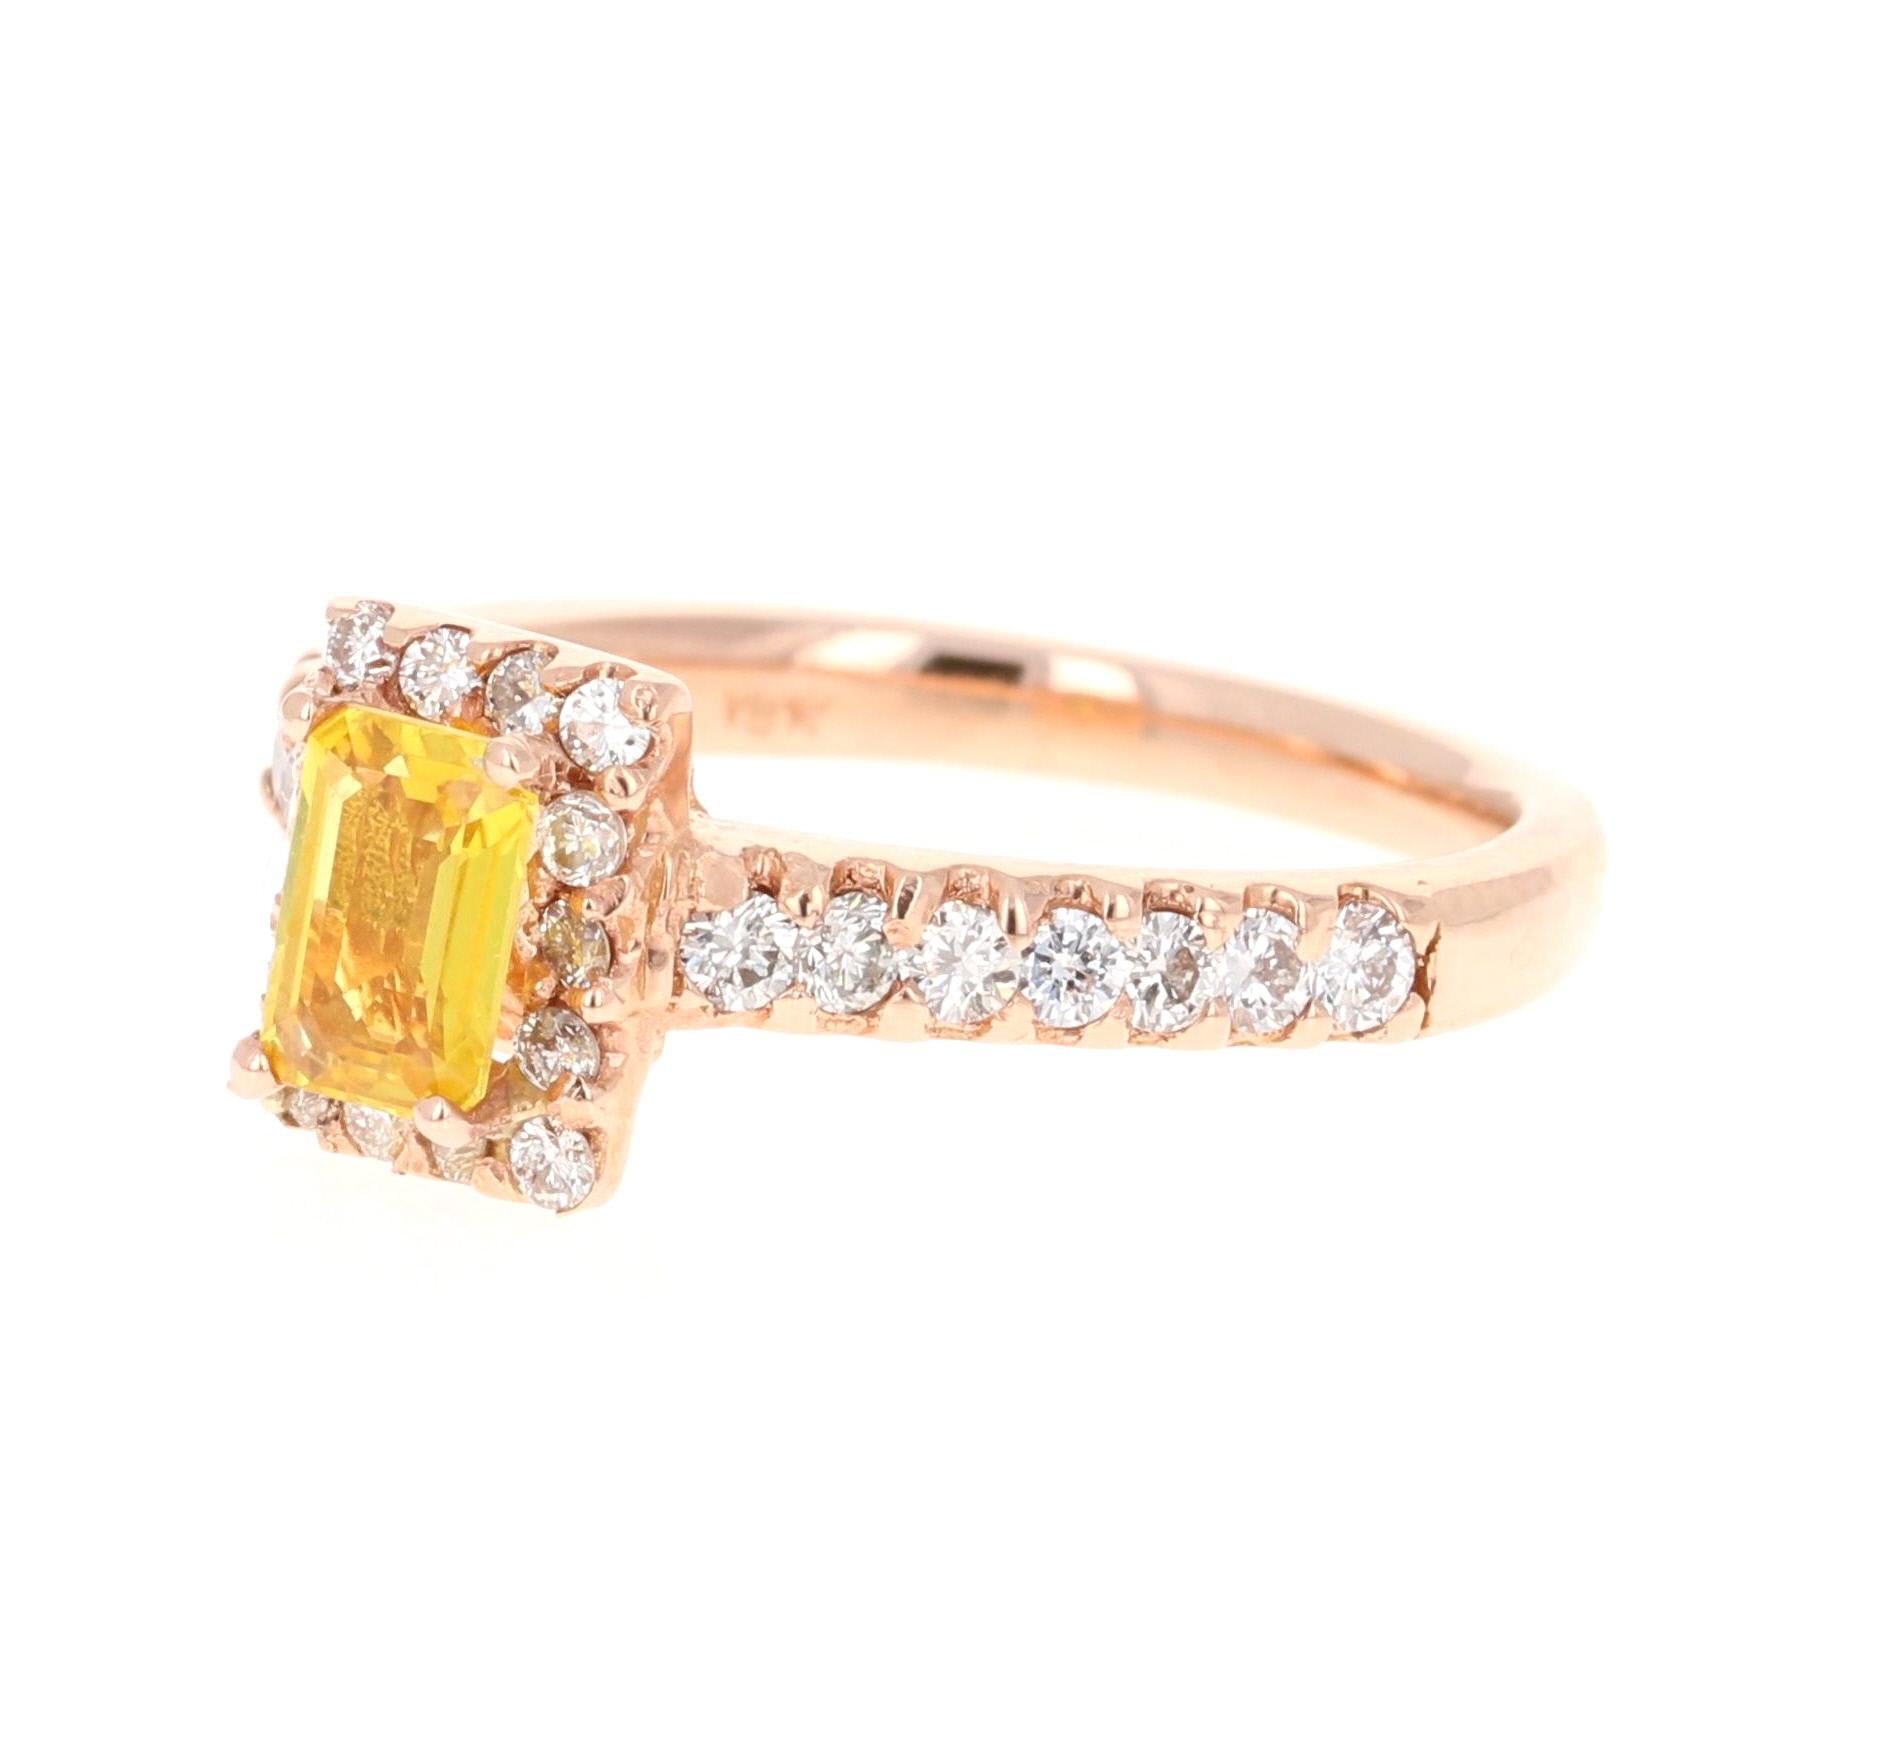 This cute ring has a Emerald Cut Yellow Sapphire that weighs 0.62 Carats and is surrounded by 28 Round Cut Diamonds that weigh 0.54 Carats. The Total Carat Weight of the ring is 1.16 Carats. 

The ring is set in a cute 18 Karat Rose Gold setting,